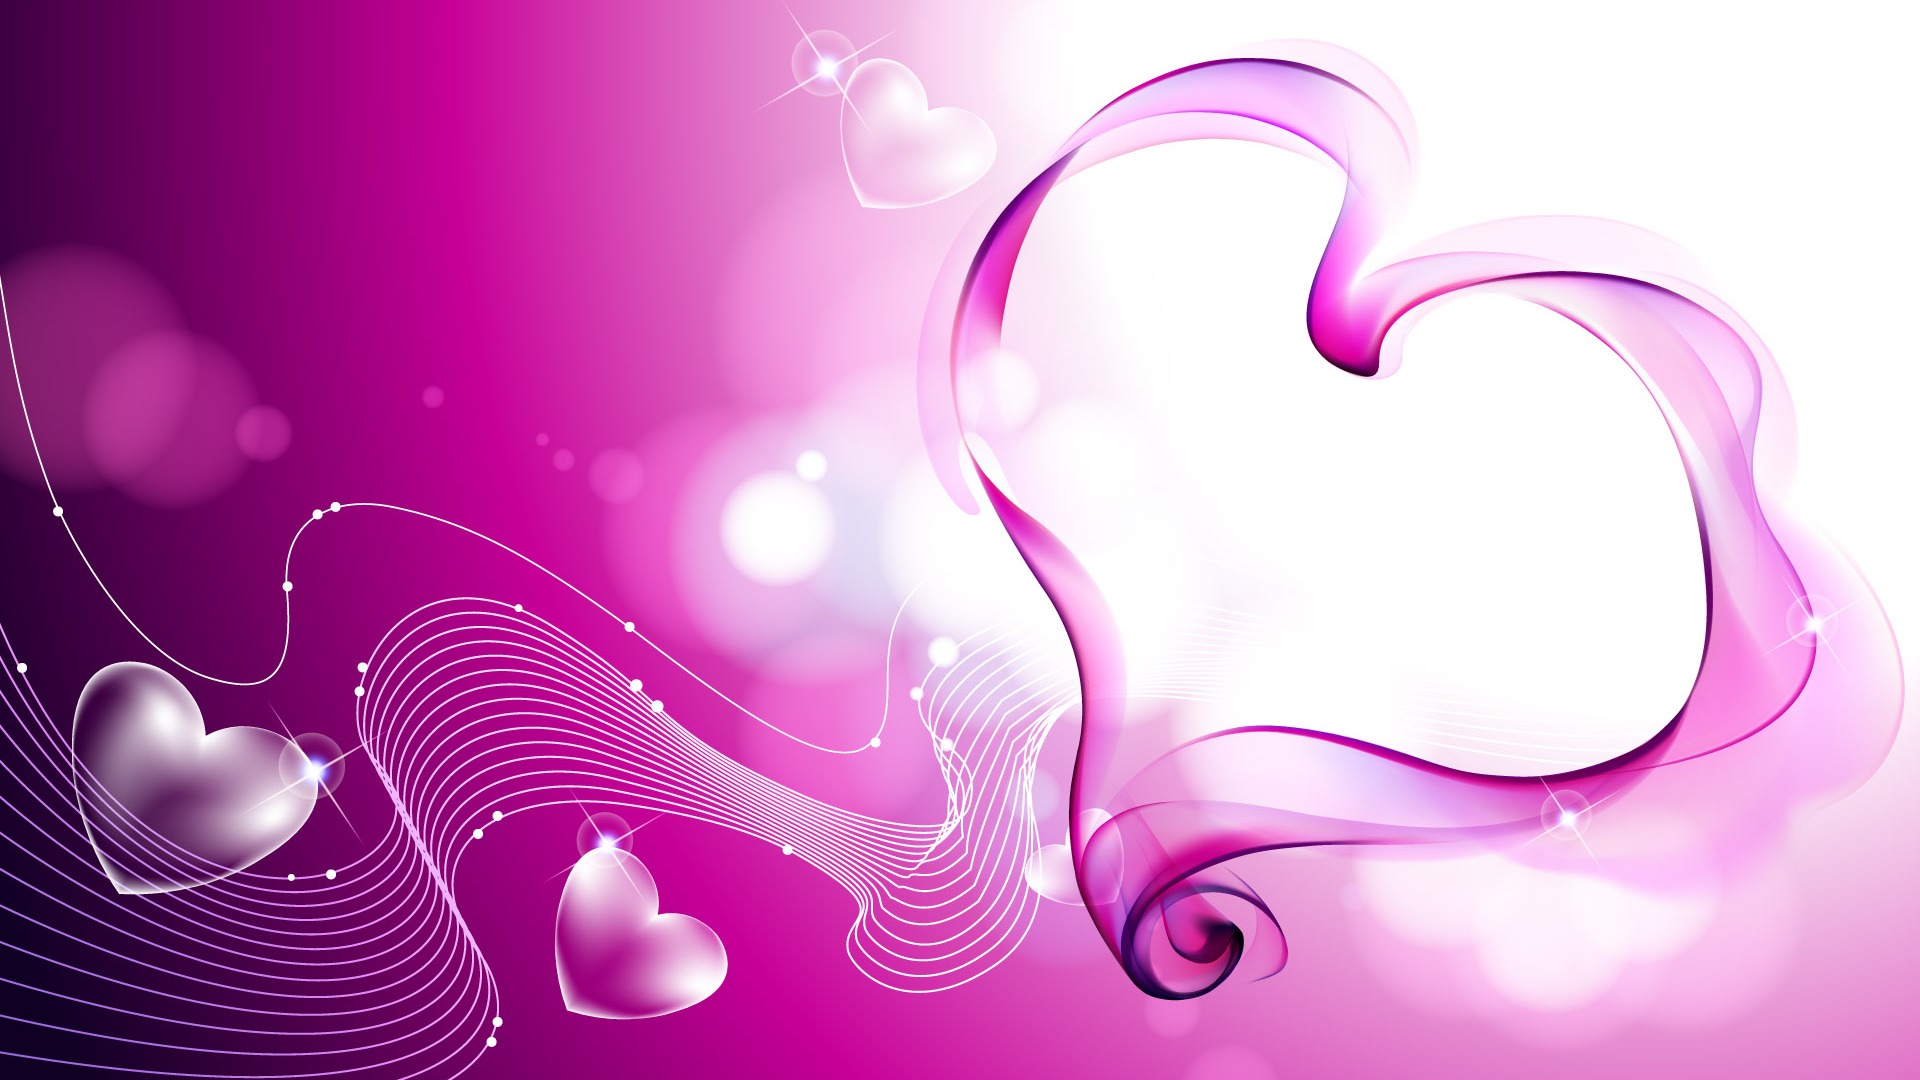 Valentine's Day Love Theme Wallpapers (3) #6 - 1920x1080